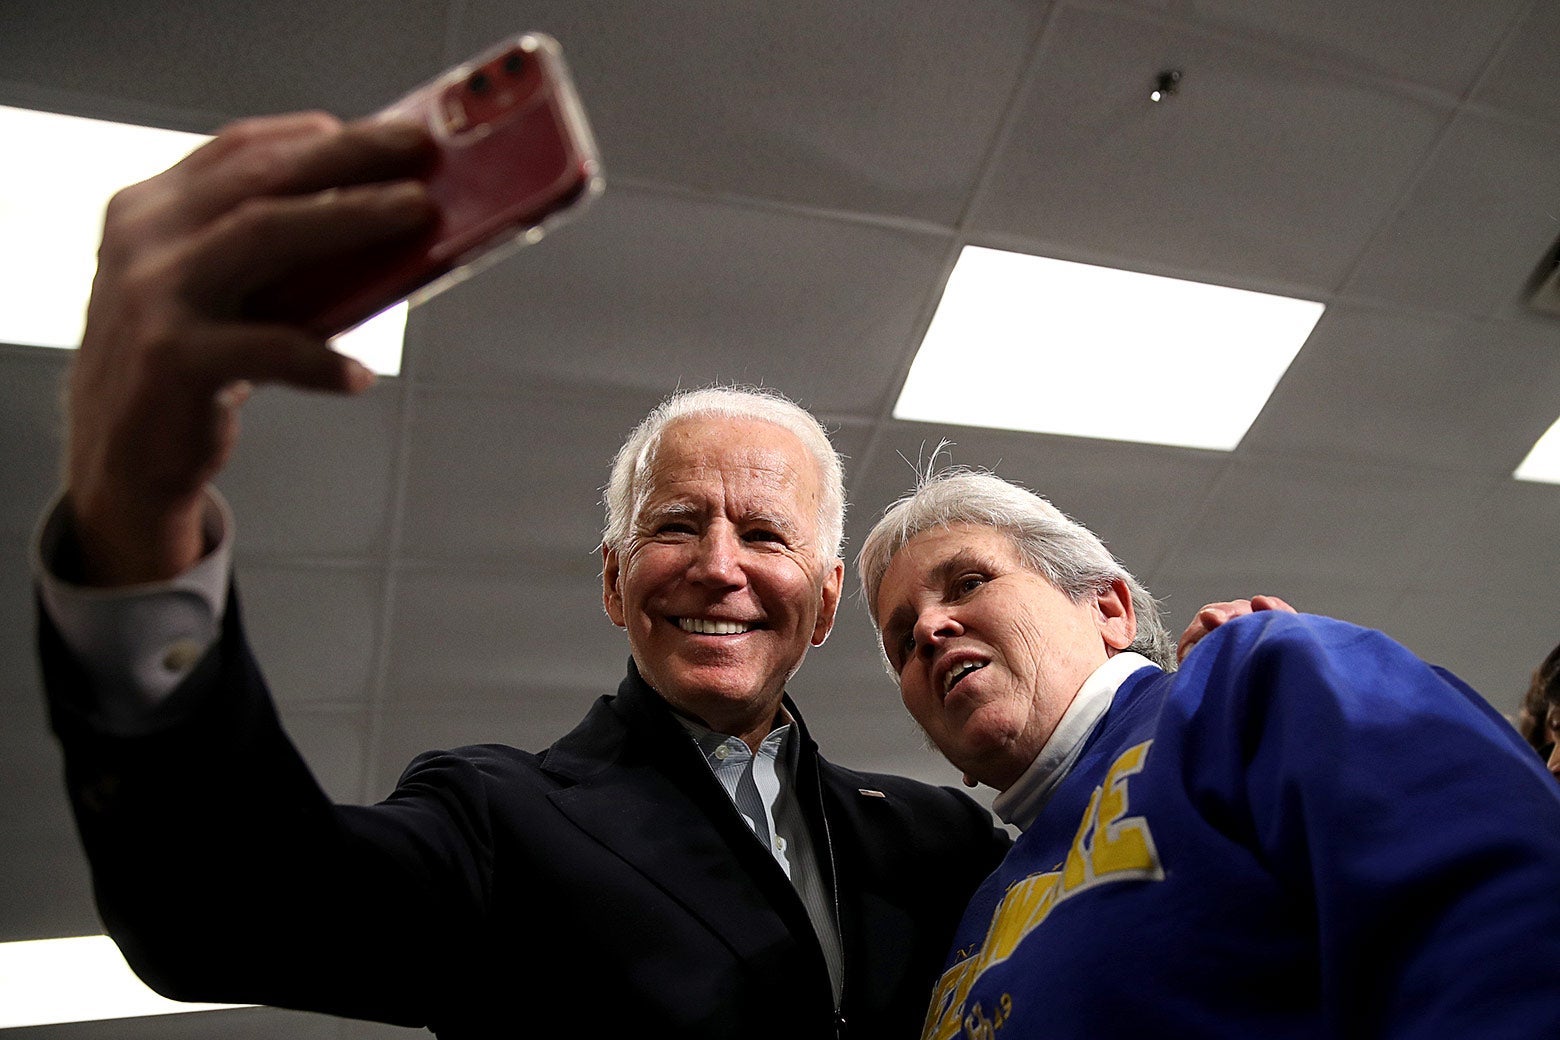 Biden takes a selfie with an older woman, both smiling